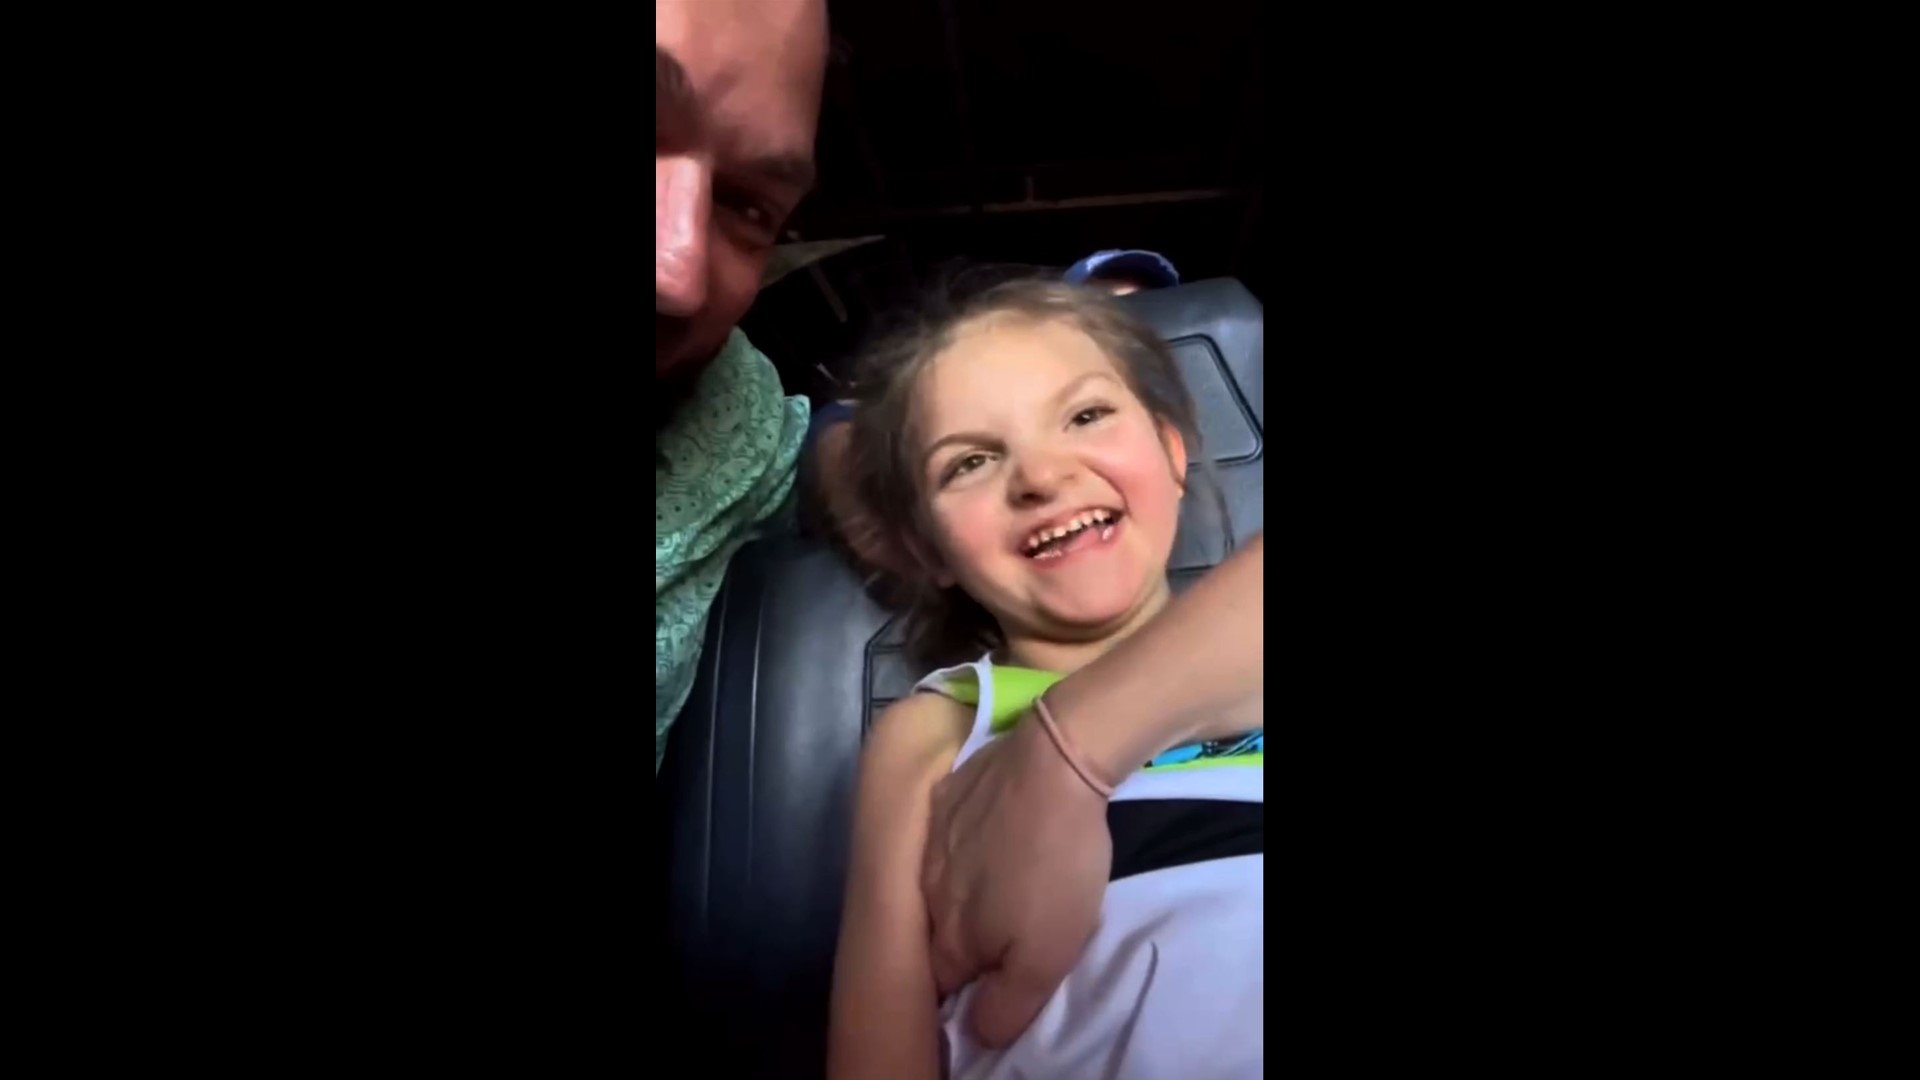 "We went on a Disney trip earlier this year and she loved it," her dad said.